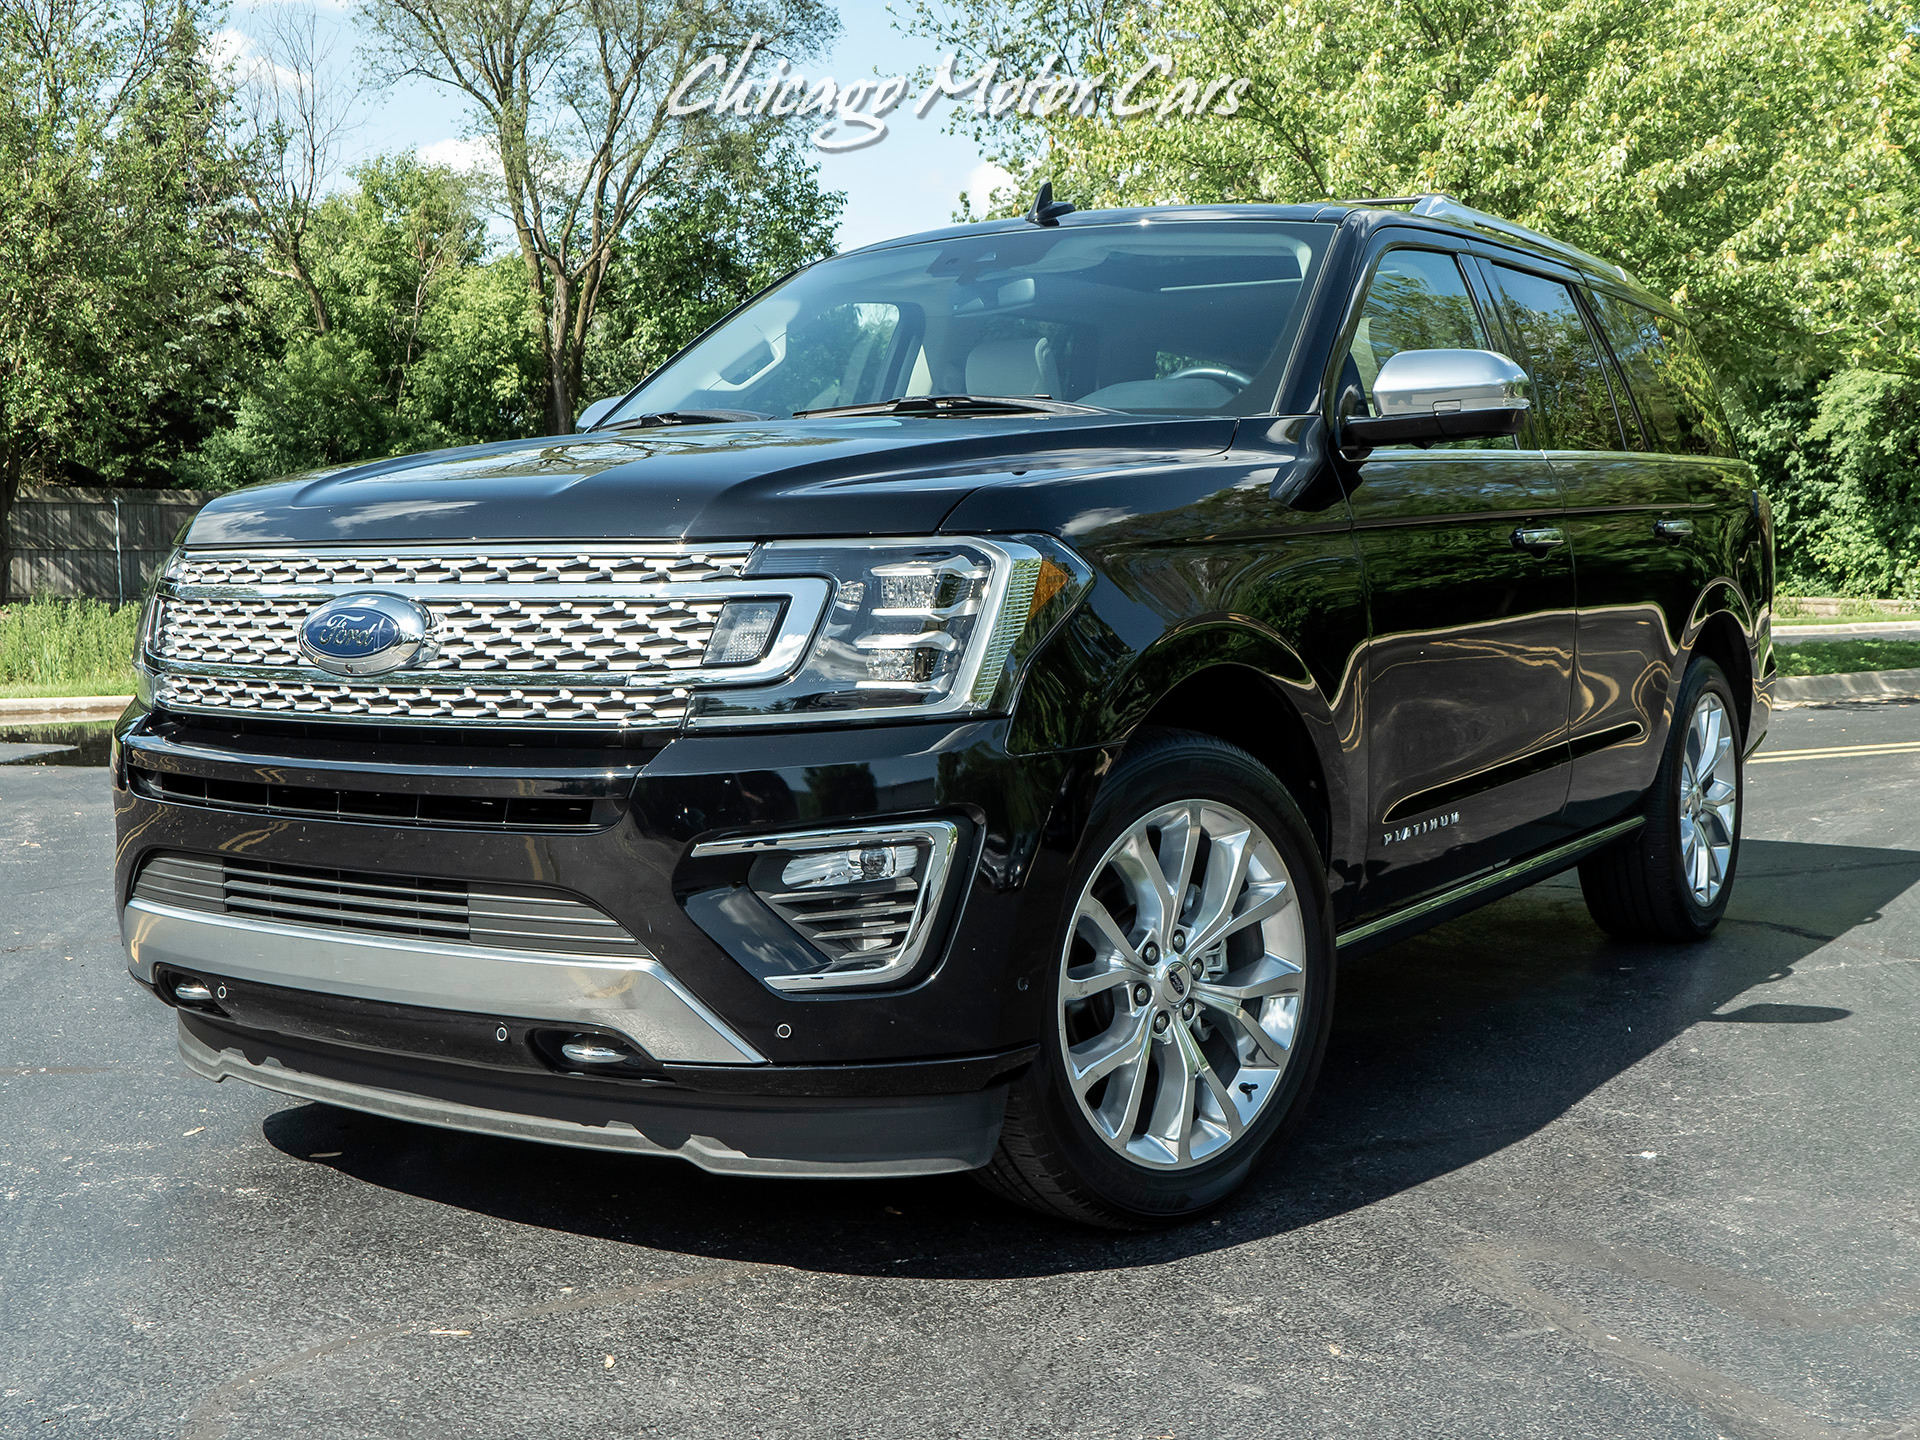 Used-2018-Ford-Expedition-Platinum-SUV-TOP-OF-THE-LINE